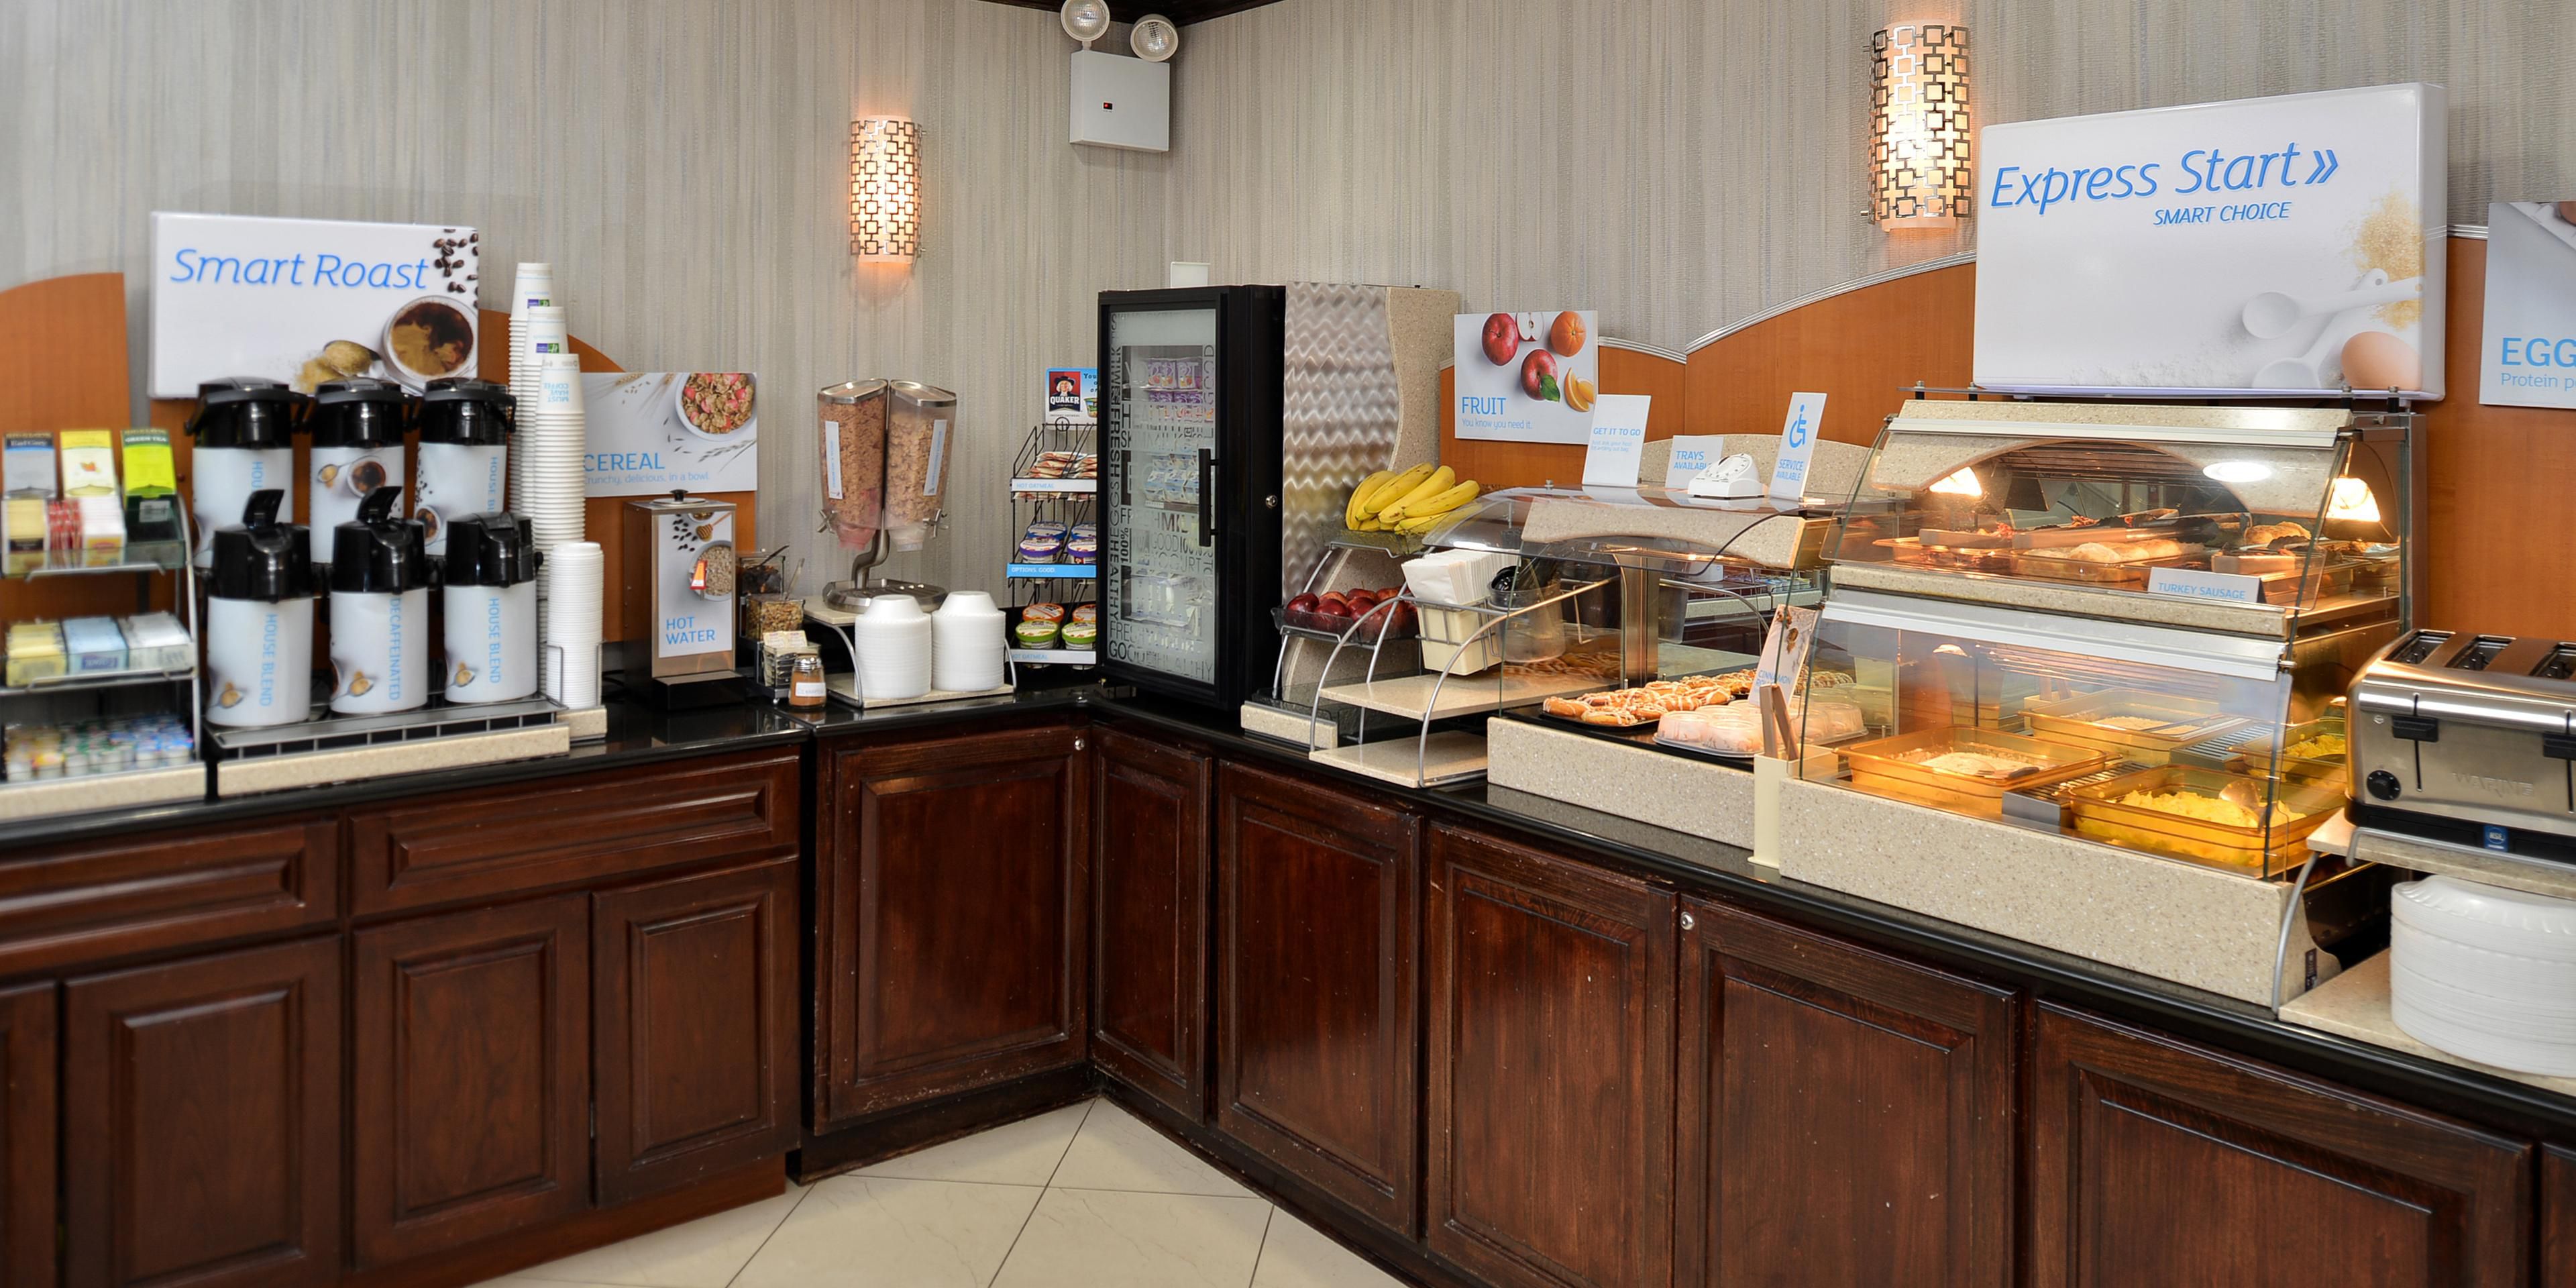 We offer a complimentary hot breakfast buffet every morning. Breakfast hours are from 5AM-9AM.